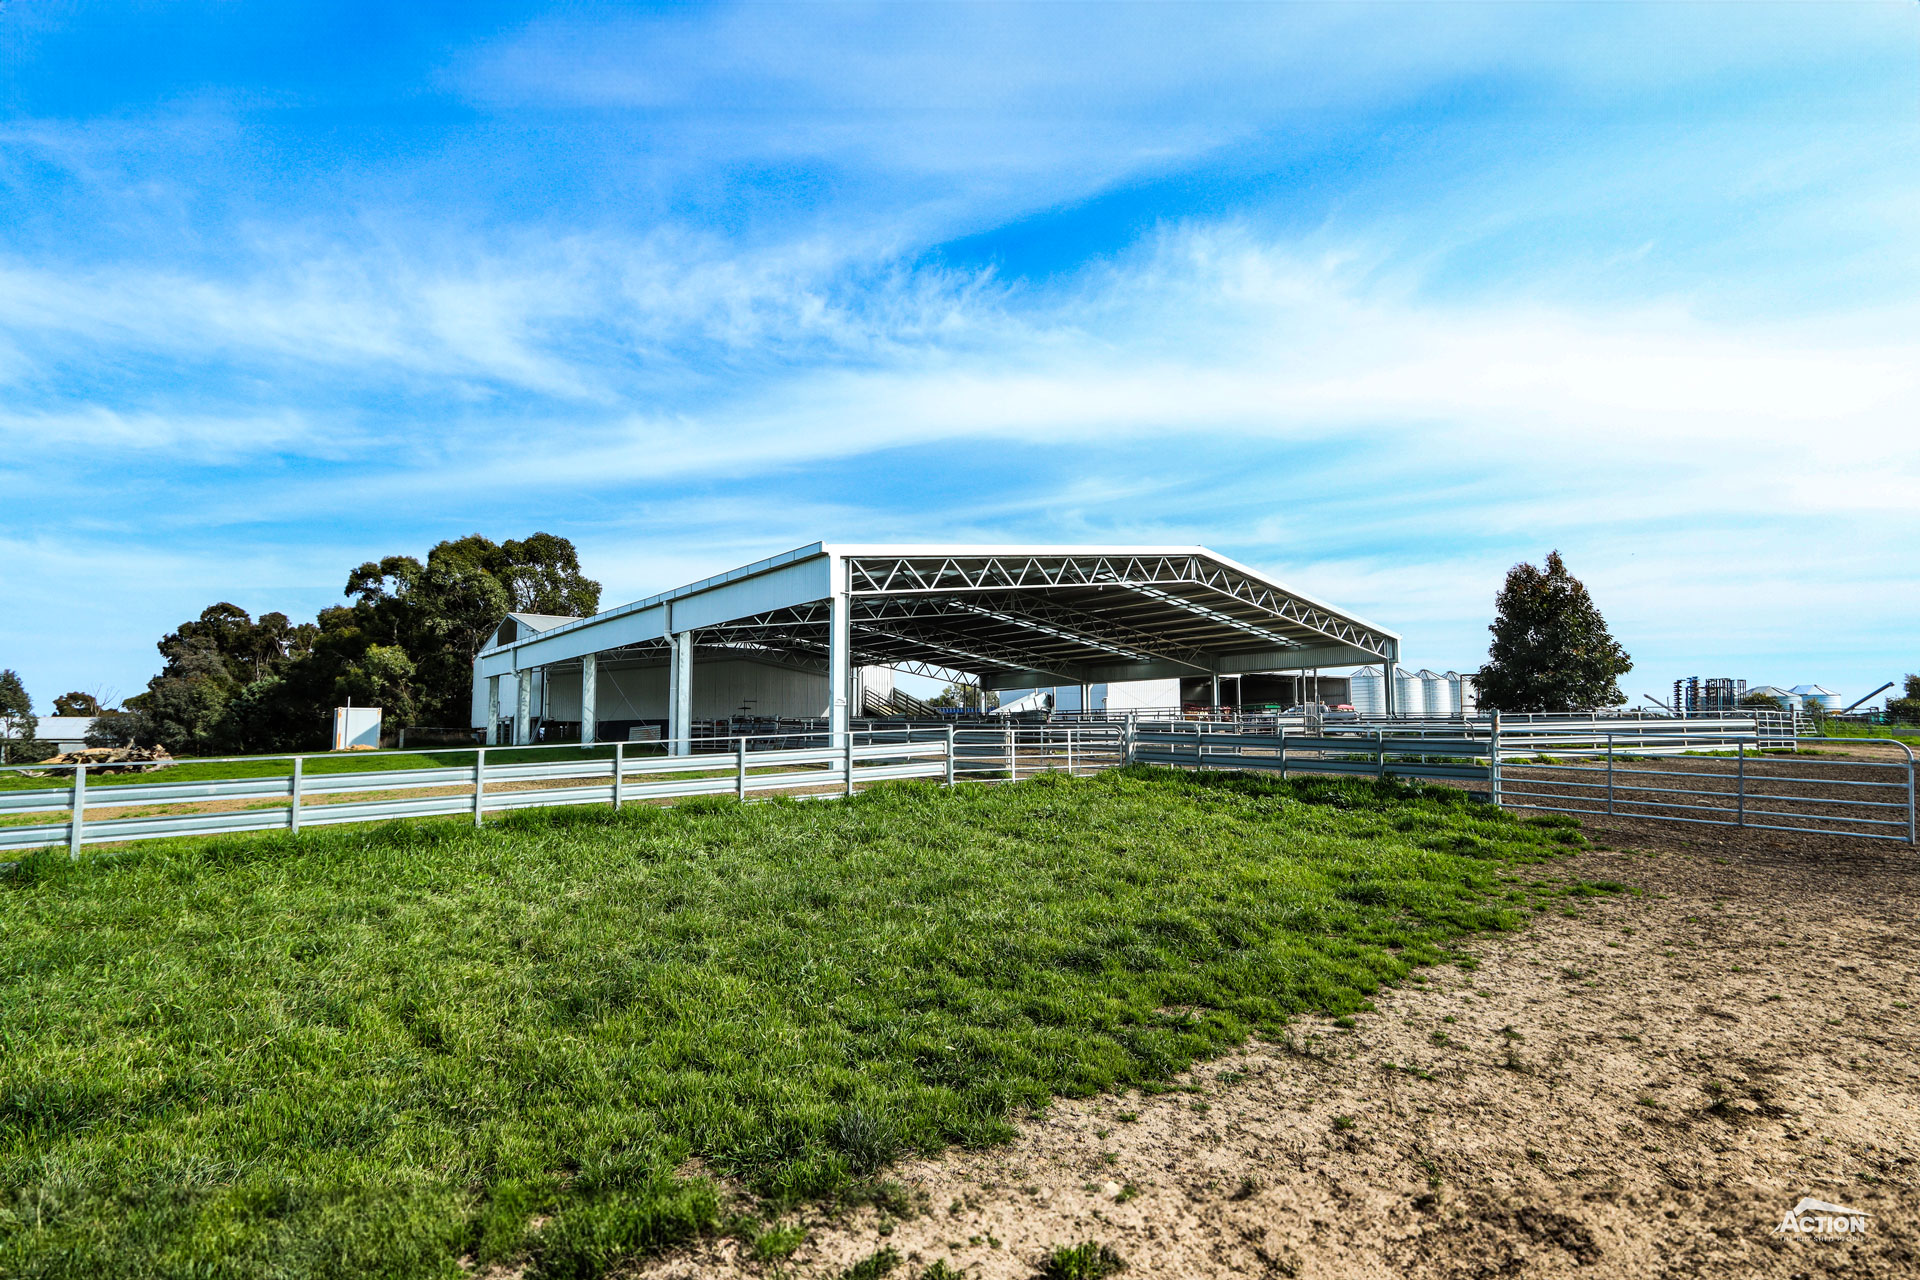 You are currently viewing 27m x 24m x 3.5m sheep yard cover